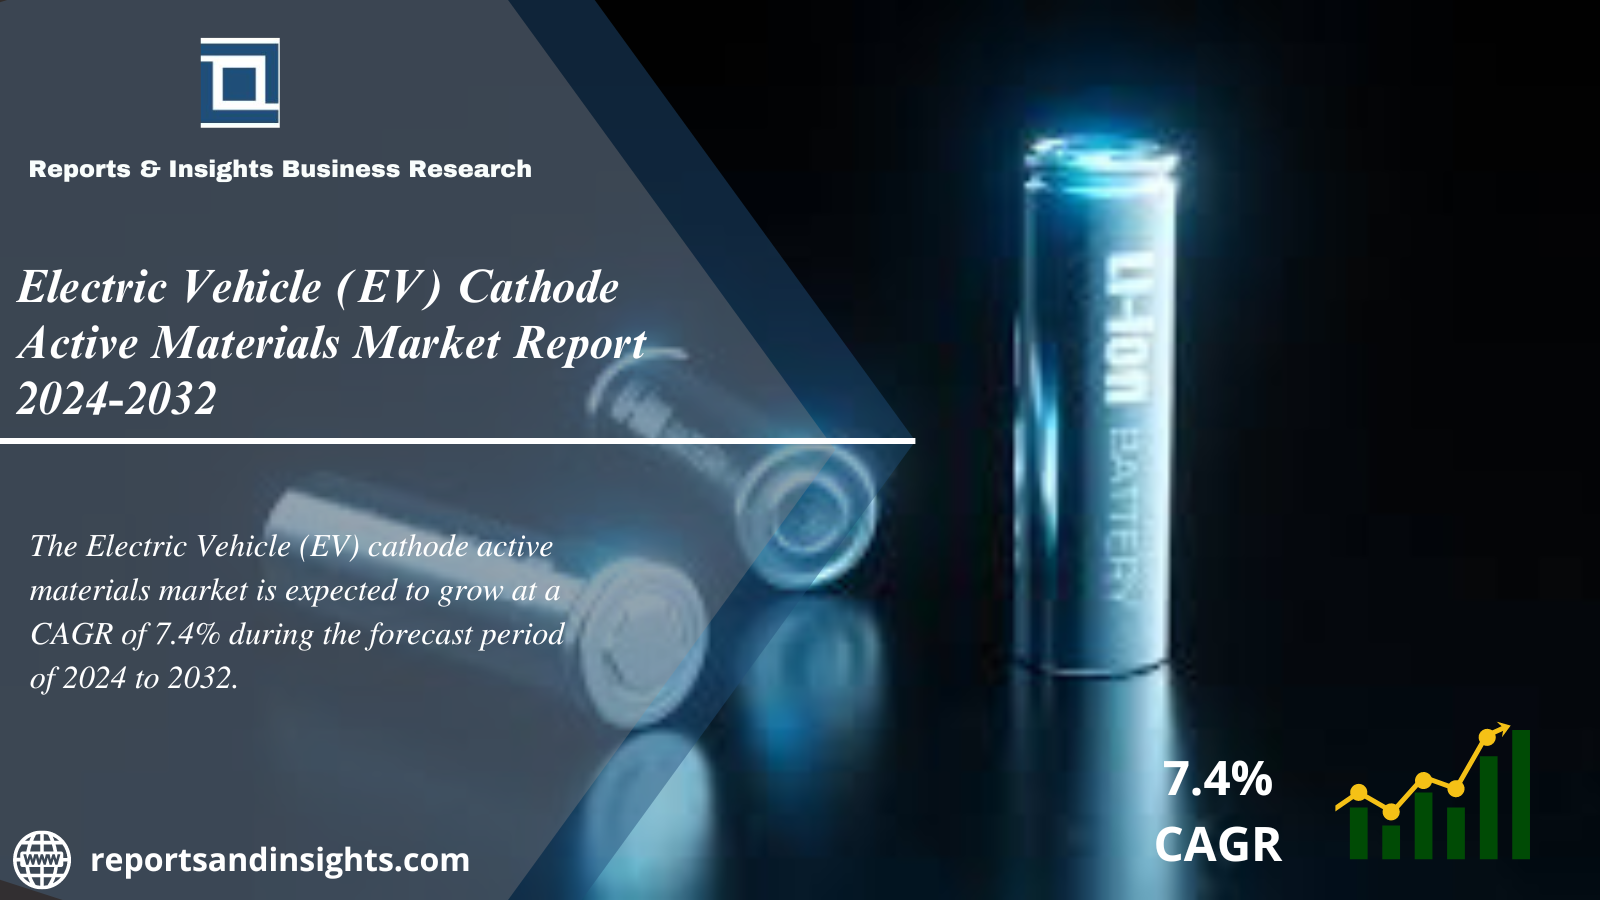 Electric Vehicle (EV) Cathode Active Materials Market Growth, Global Size, Share, Trends and Analysis 2024 to 2032